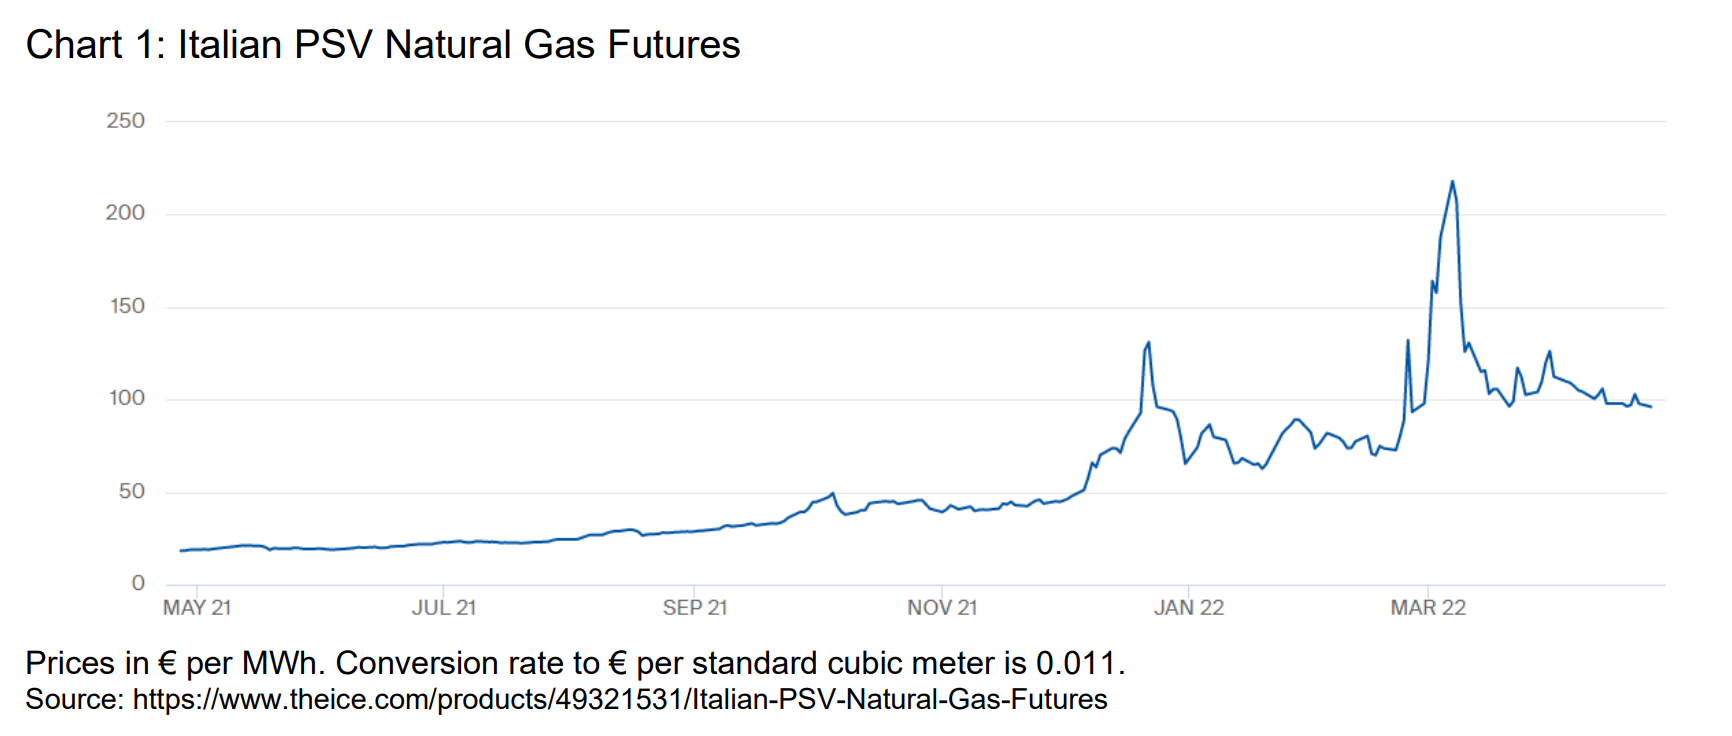 A look at the price of Italian natural gas futures through 2022 